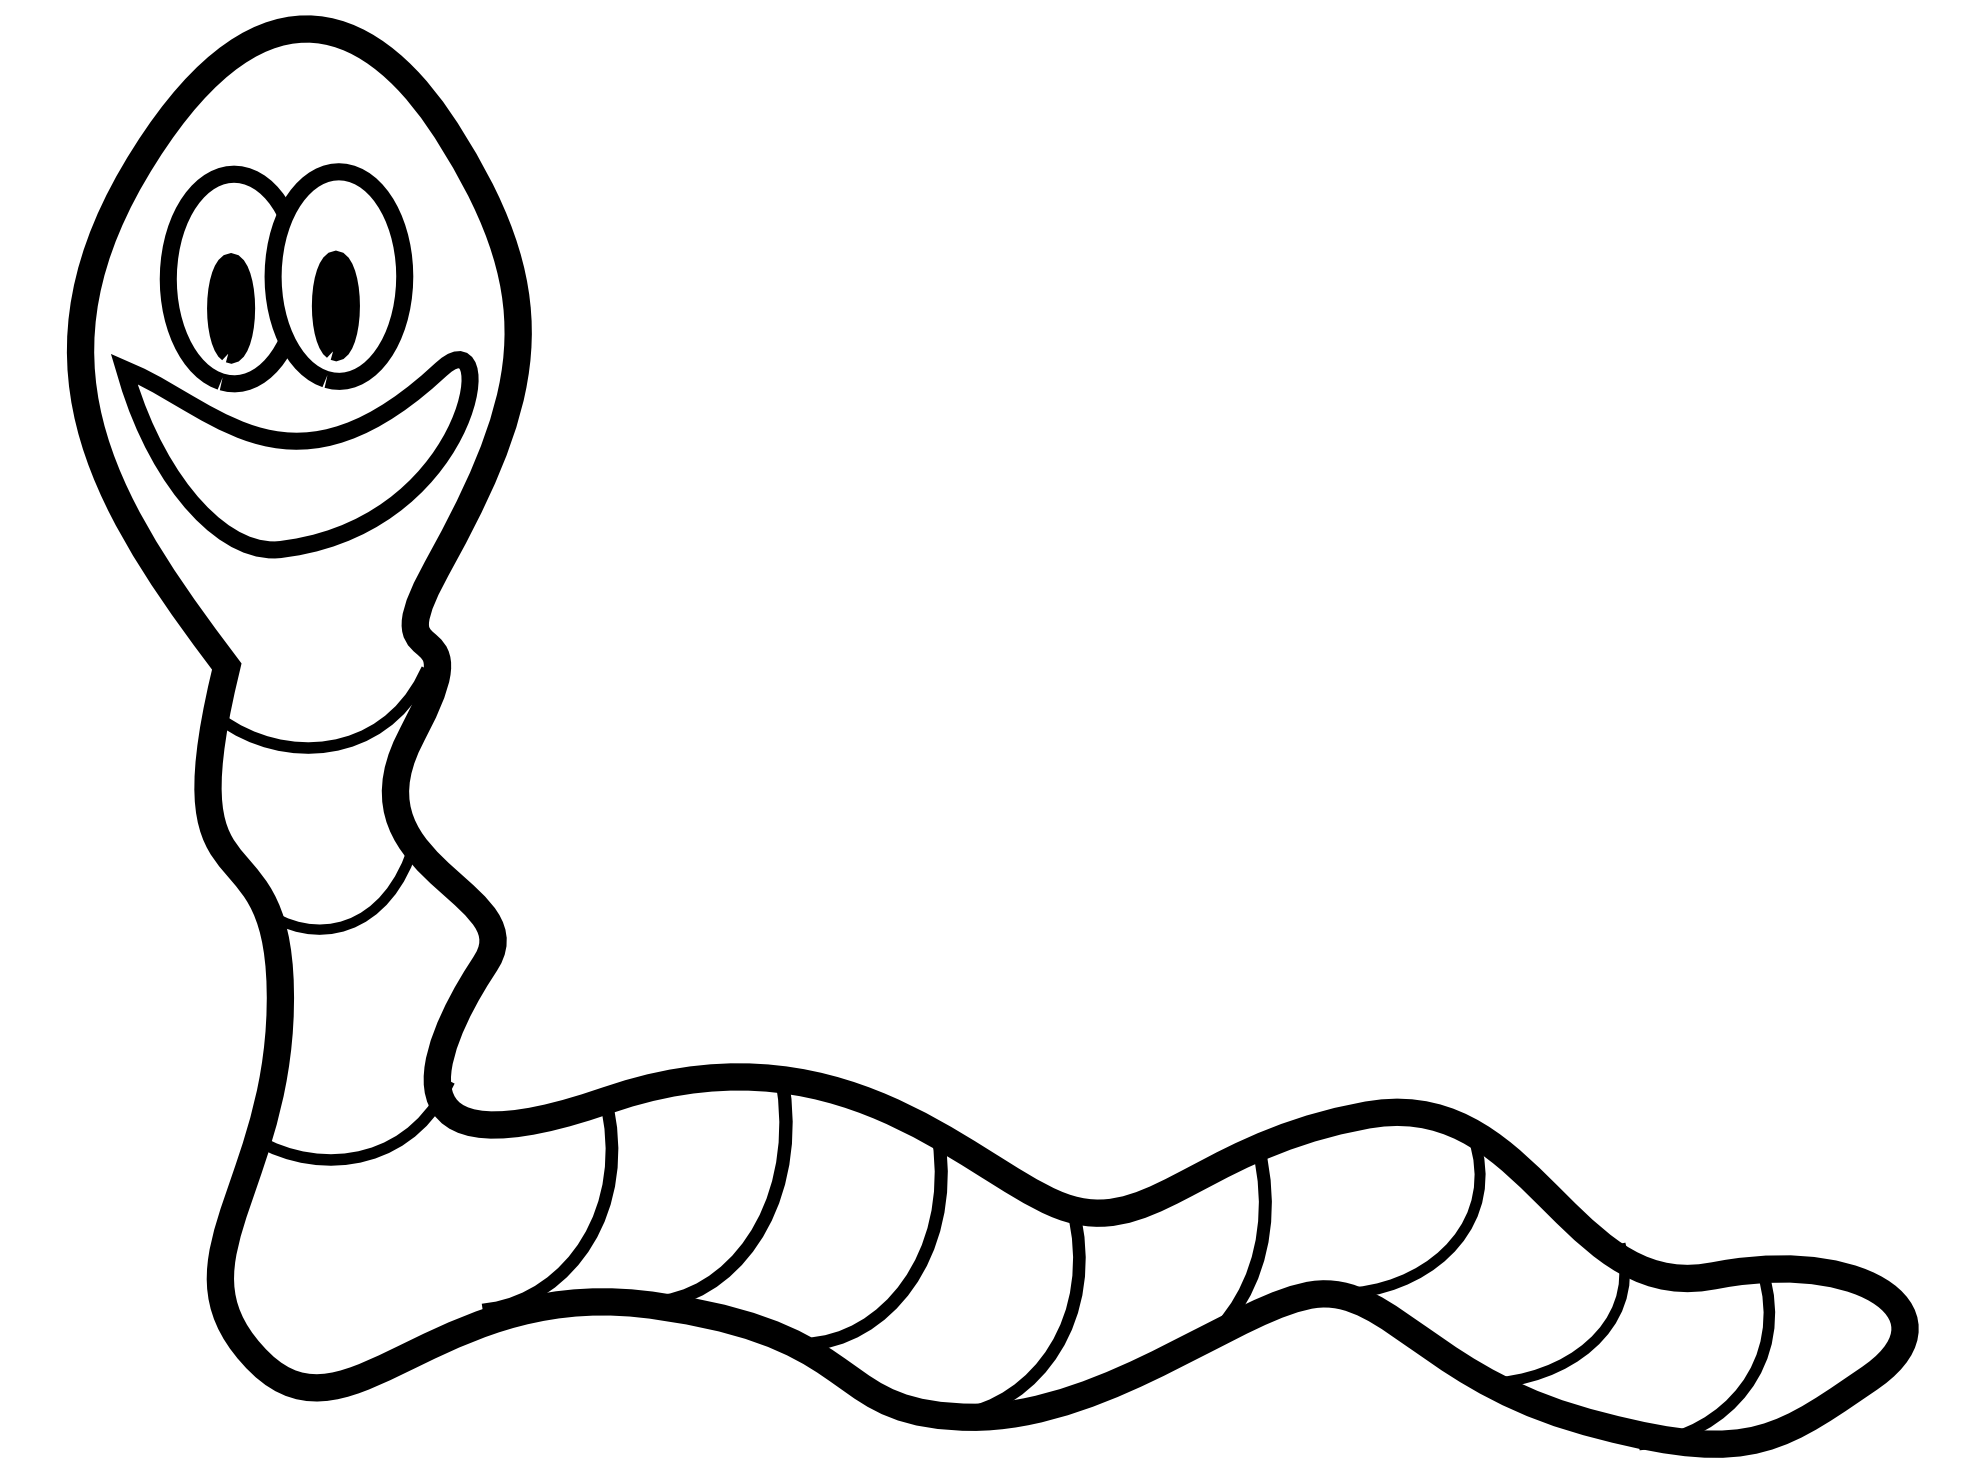 Worm 7 Black White Line Flower Art Coloring Sheet Colouring Page    